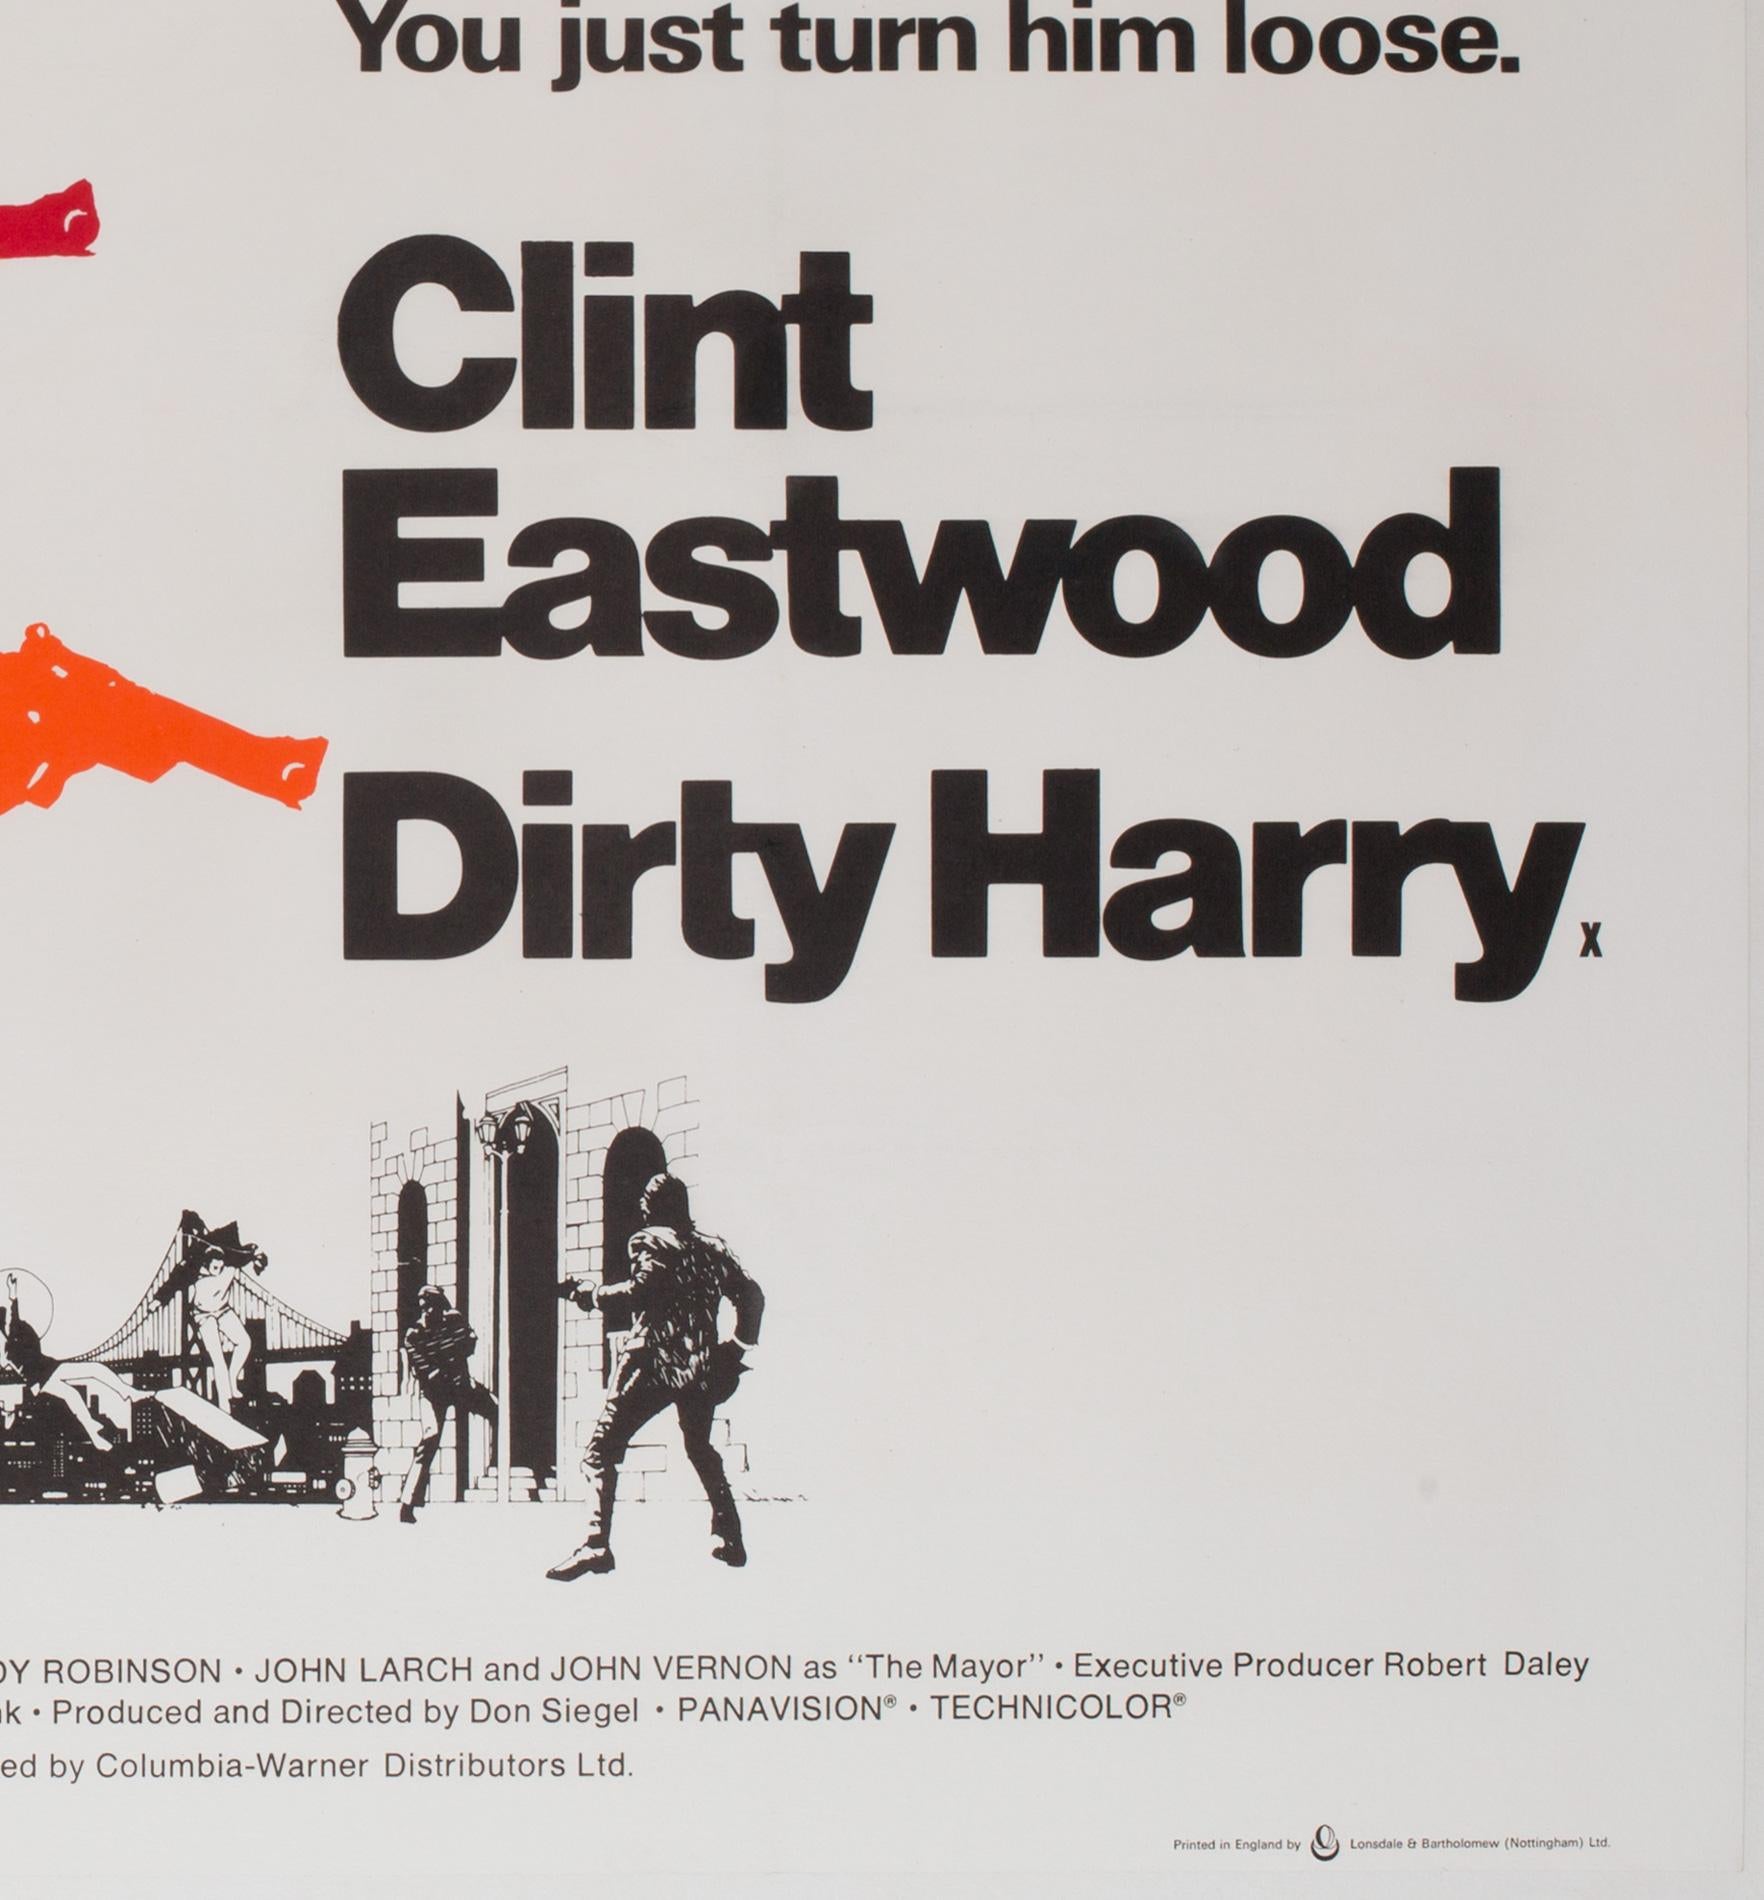 Dirty Harry Original UK Film Poster, 1971, Client Eastwood In Excellent Condition In Bath, Somerset